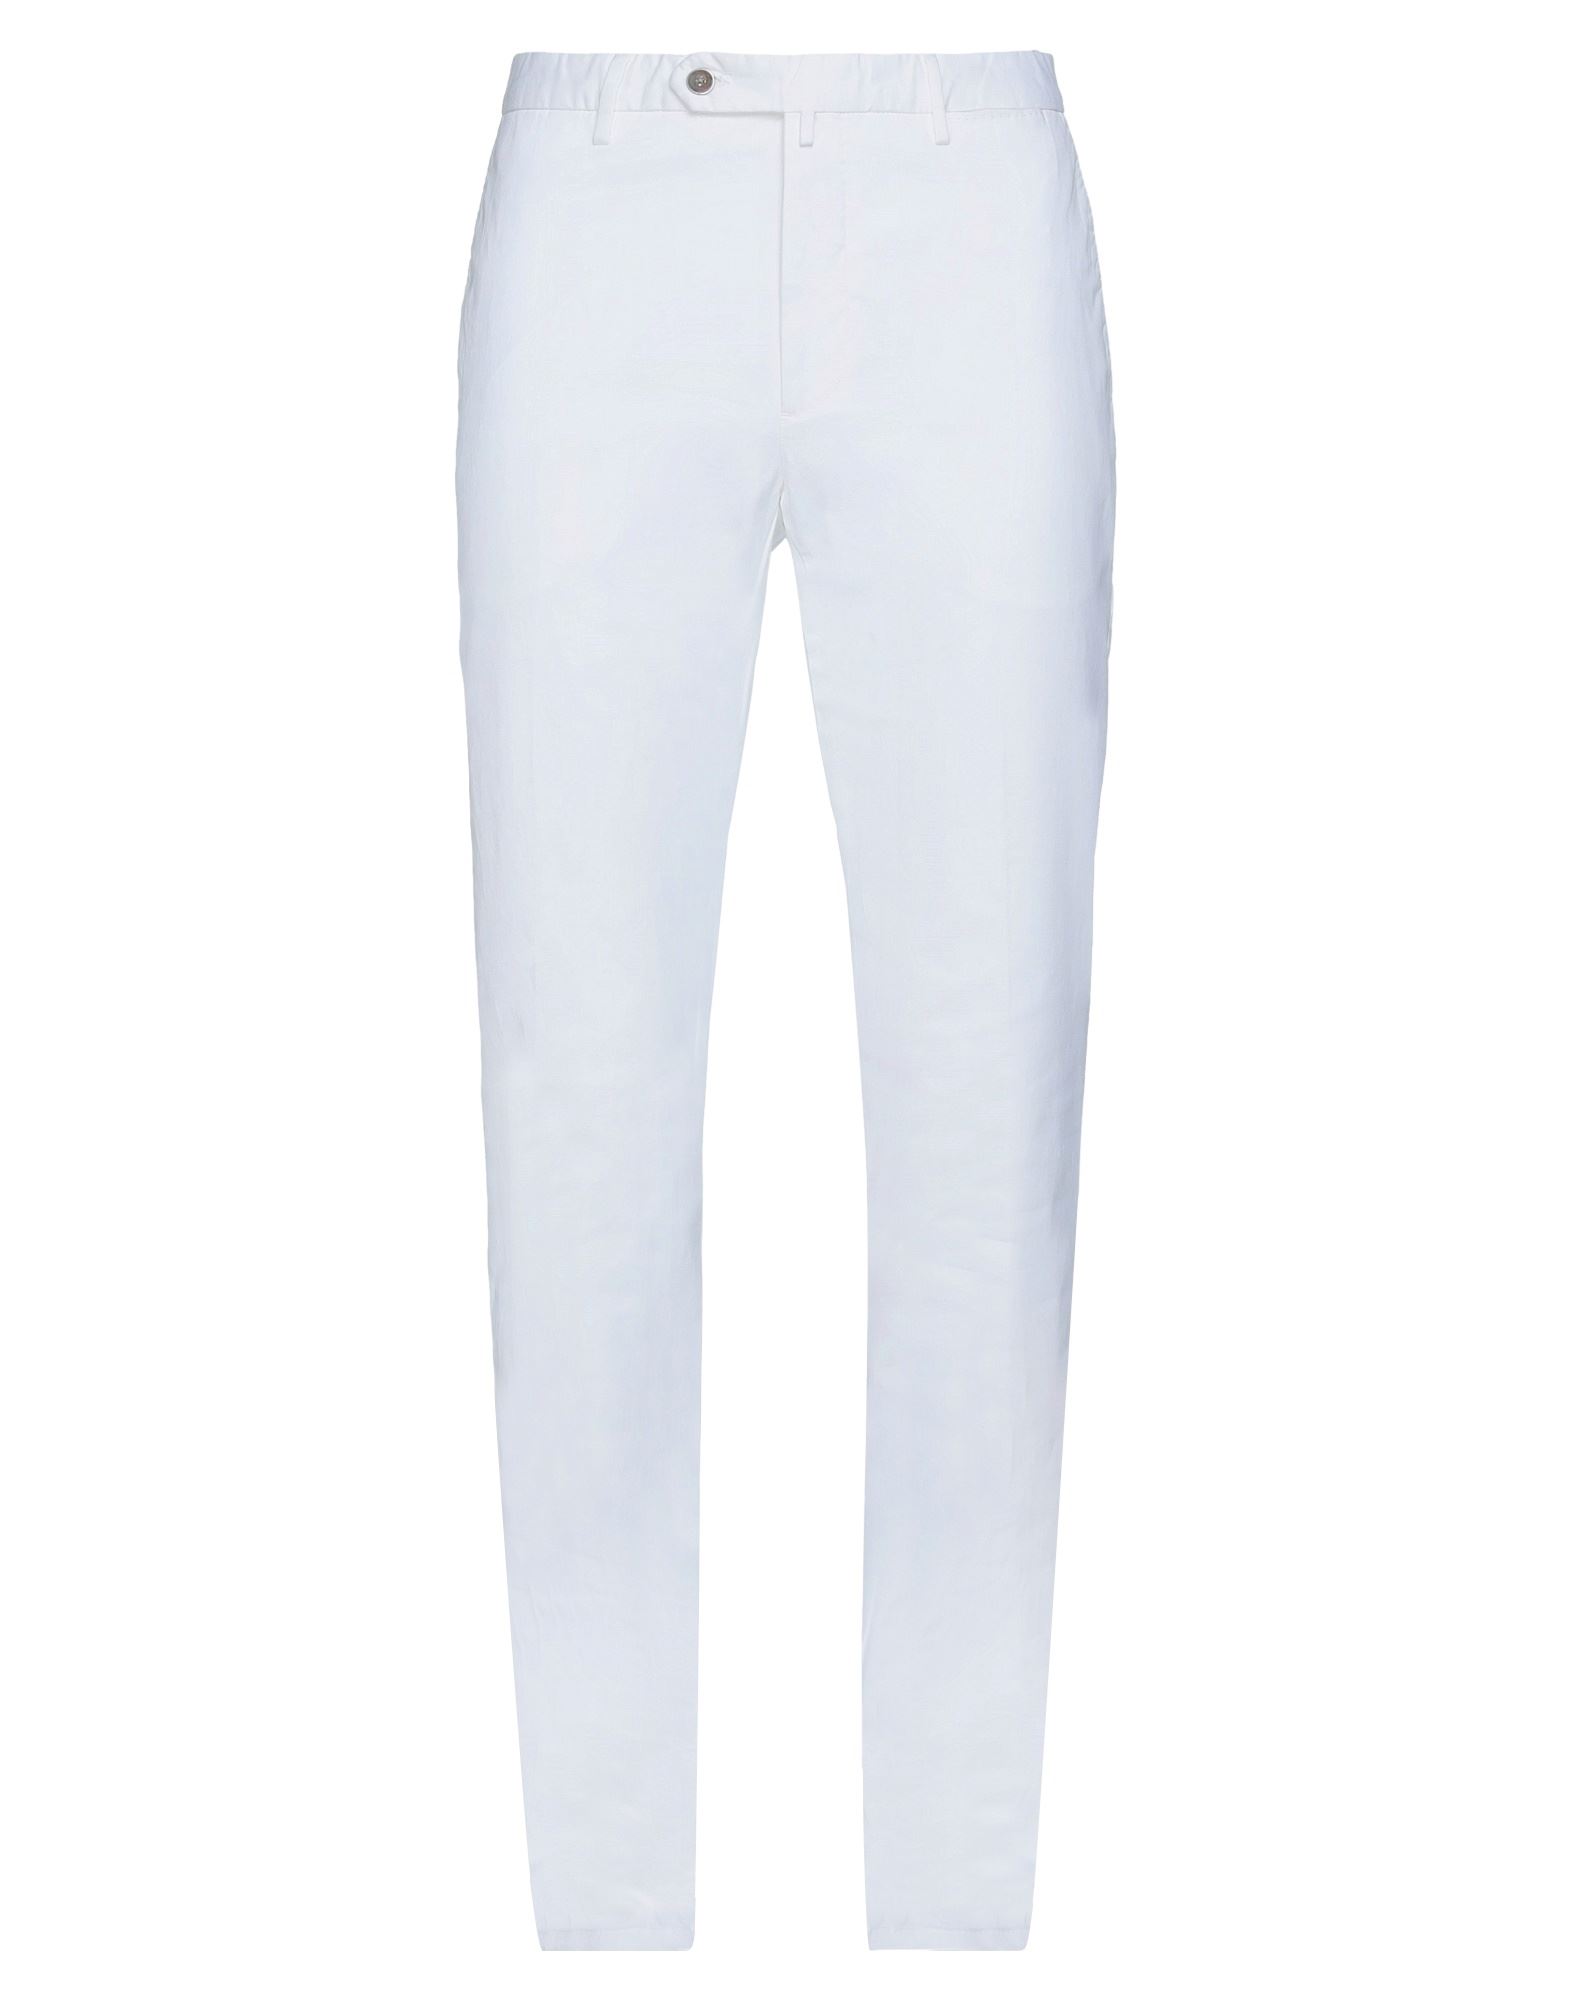 North Star '68 Pants In White